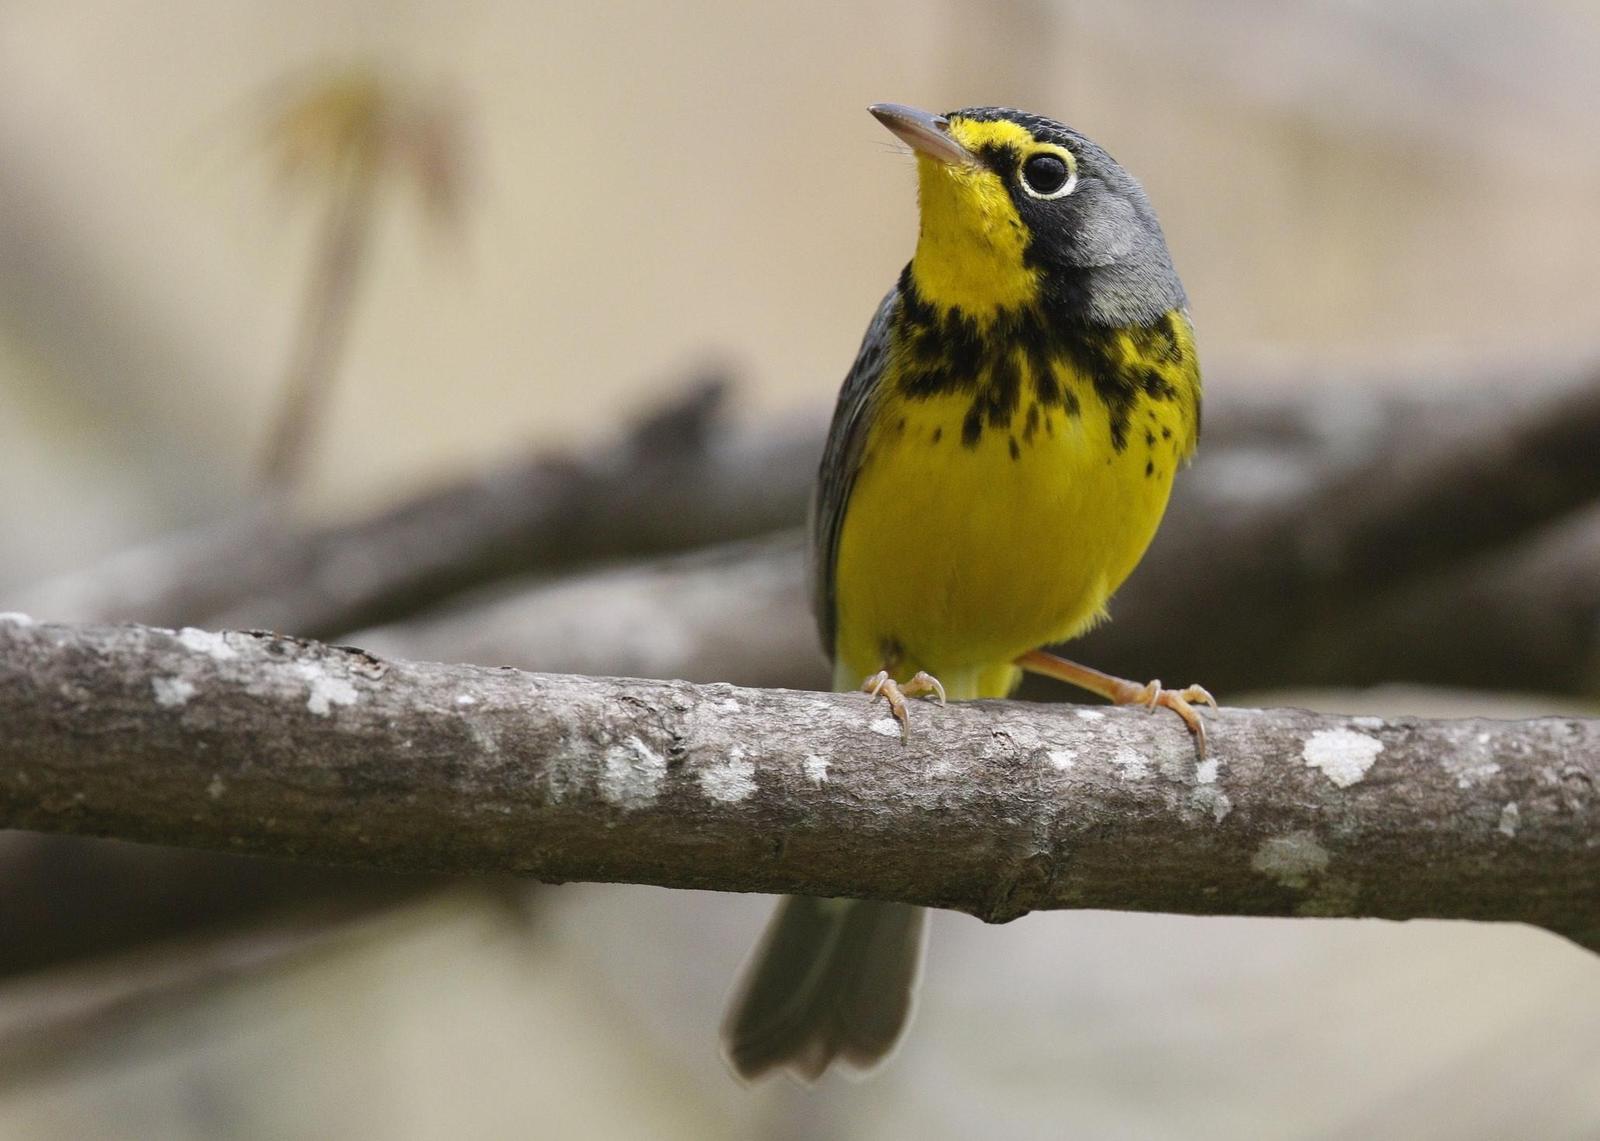 Canada Warbler Photo by Emily Willoughby